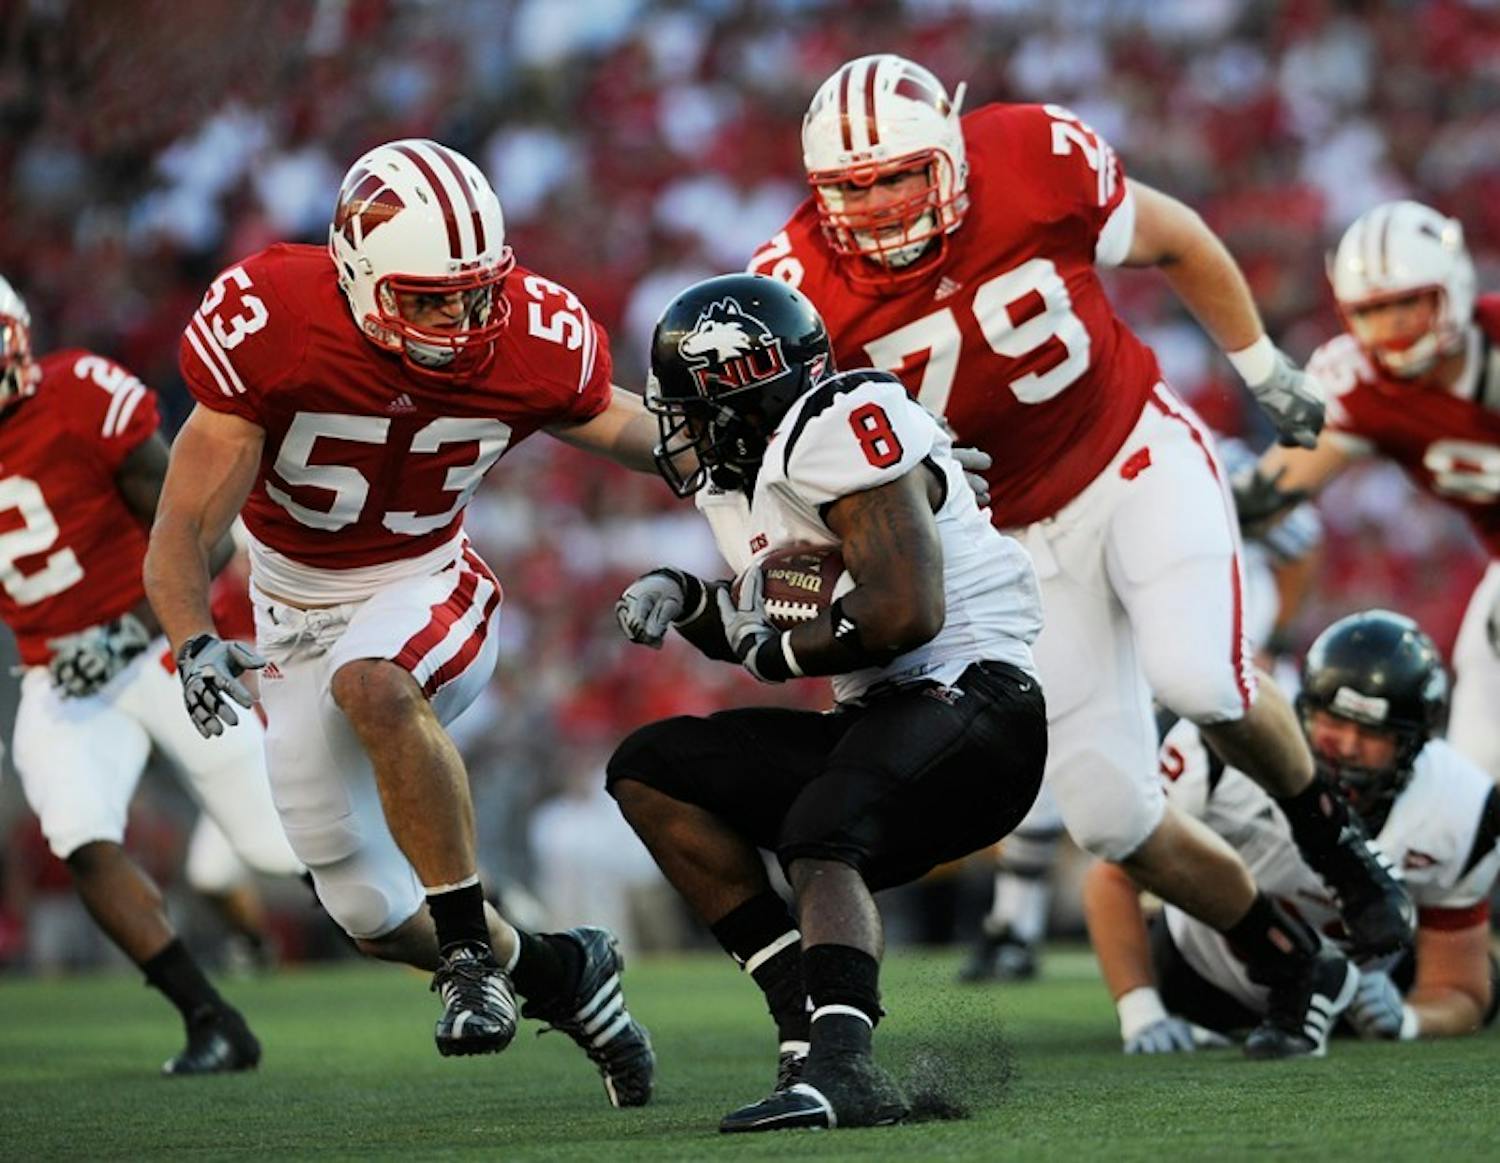 Badgers must count on youthful linebackers